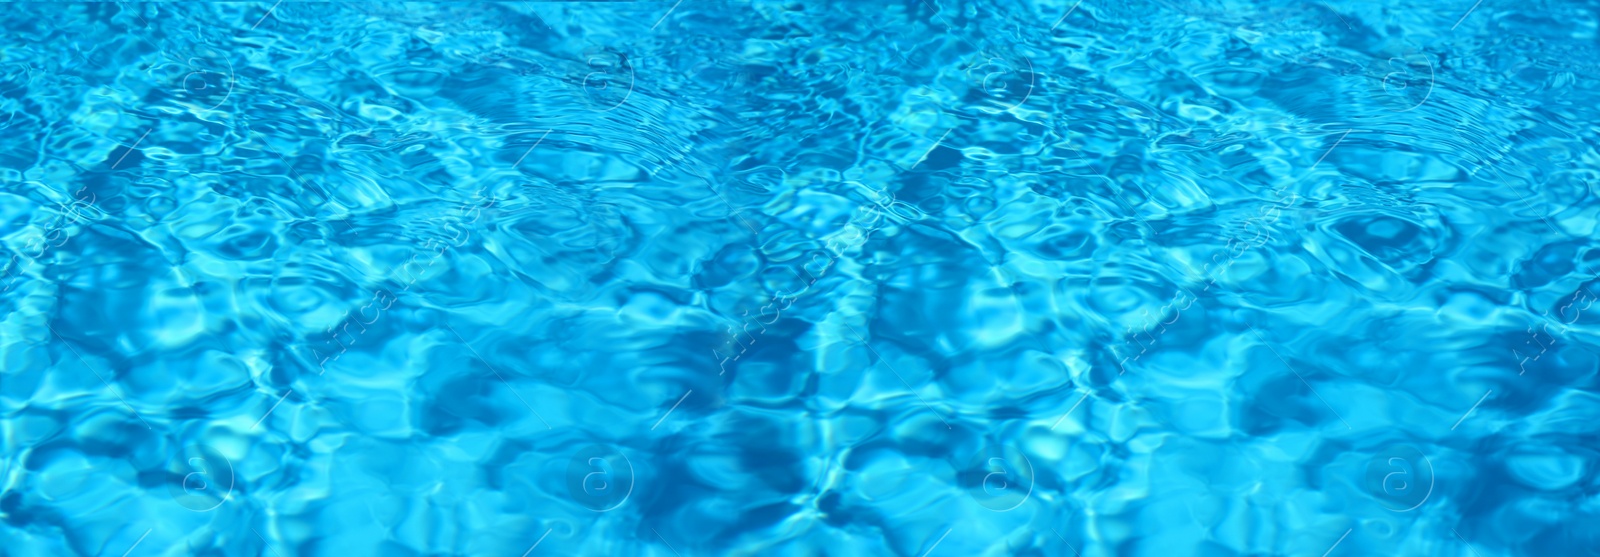 Image of Texture of blue water in swimming pool as background. Banner design